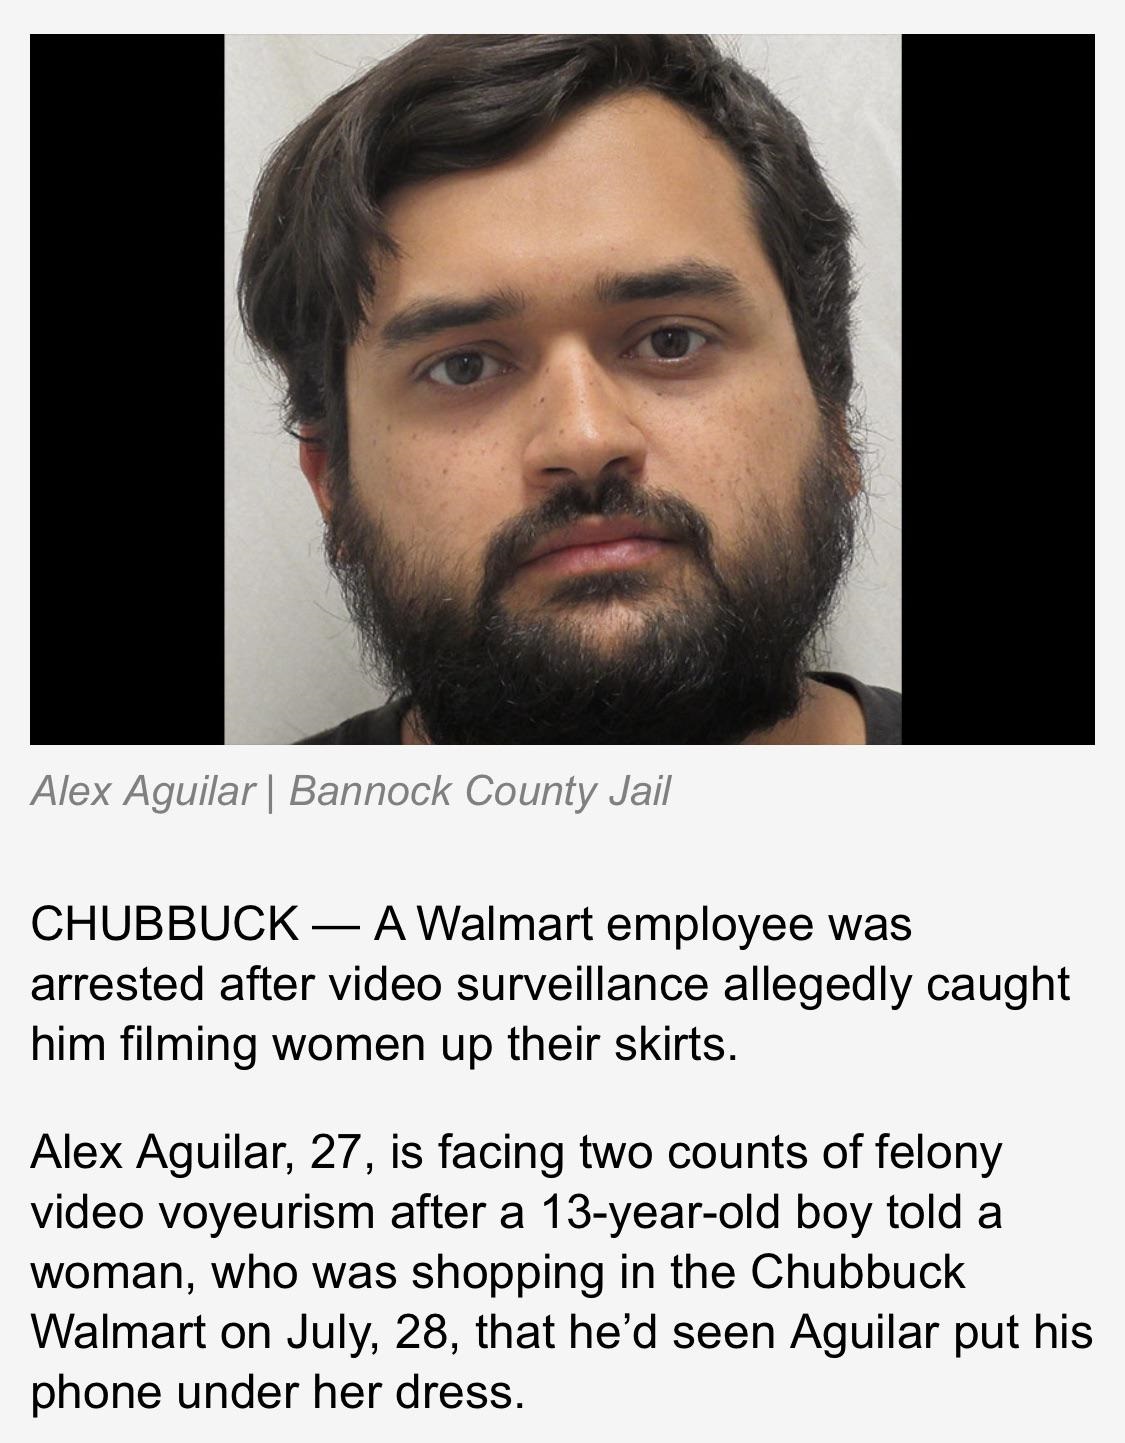 beard - Alex Aguilar | Bannock County Jail Chubbuck A Walmart employee was arrested after video surveillance allegedly caught him filming women up their skirts. Alex Aguilar, 27, is facing two counts of felony video voyeurism after a 13yearold boy told a 